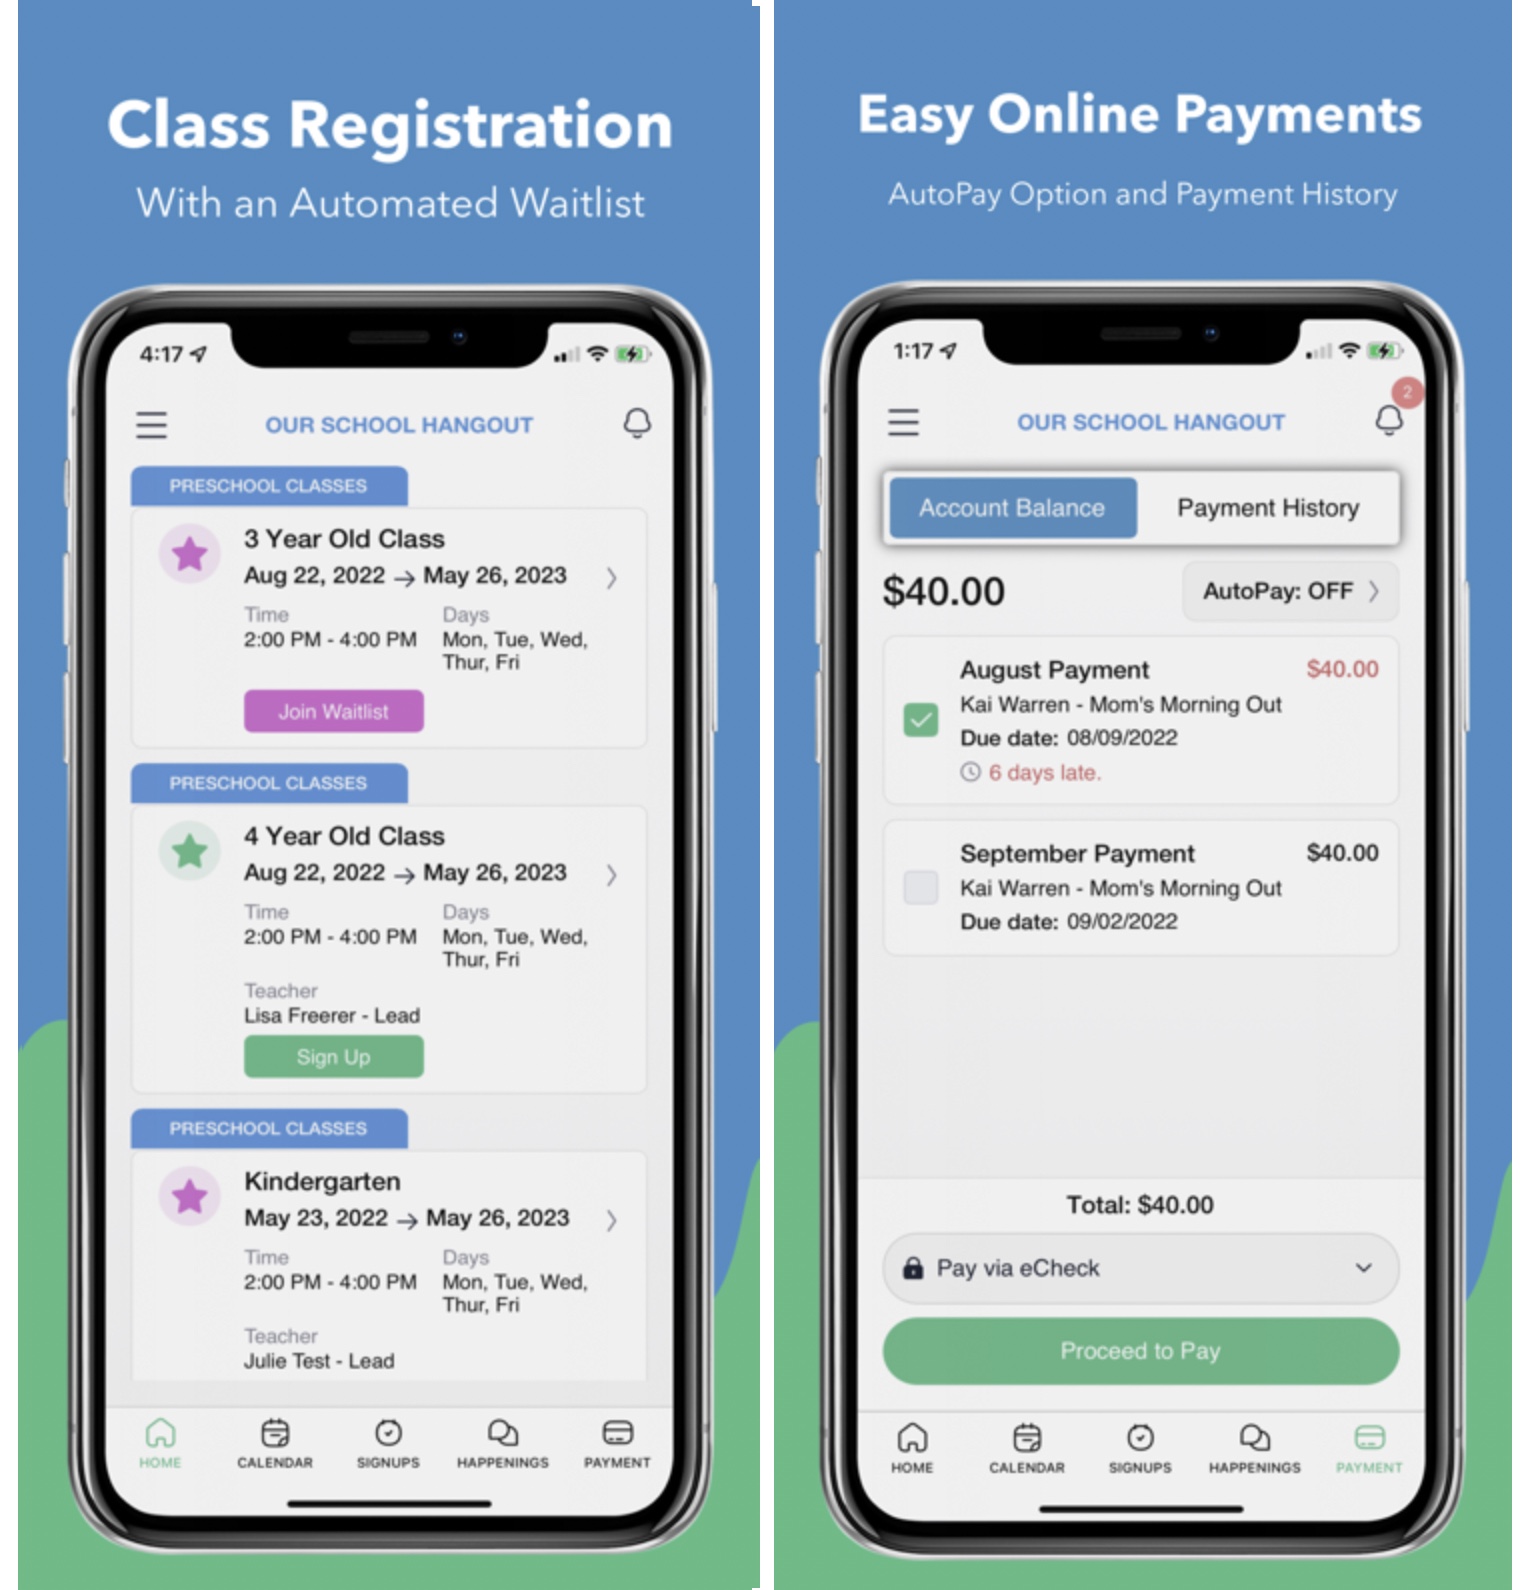 The app seamlessly integrates class registration and tuition payments, offering parents the convenience of AutoPay, and easy access to download payment history and tax receipts, ensuring a streamlined and efficient user experience.